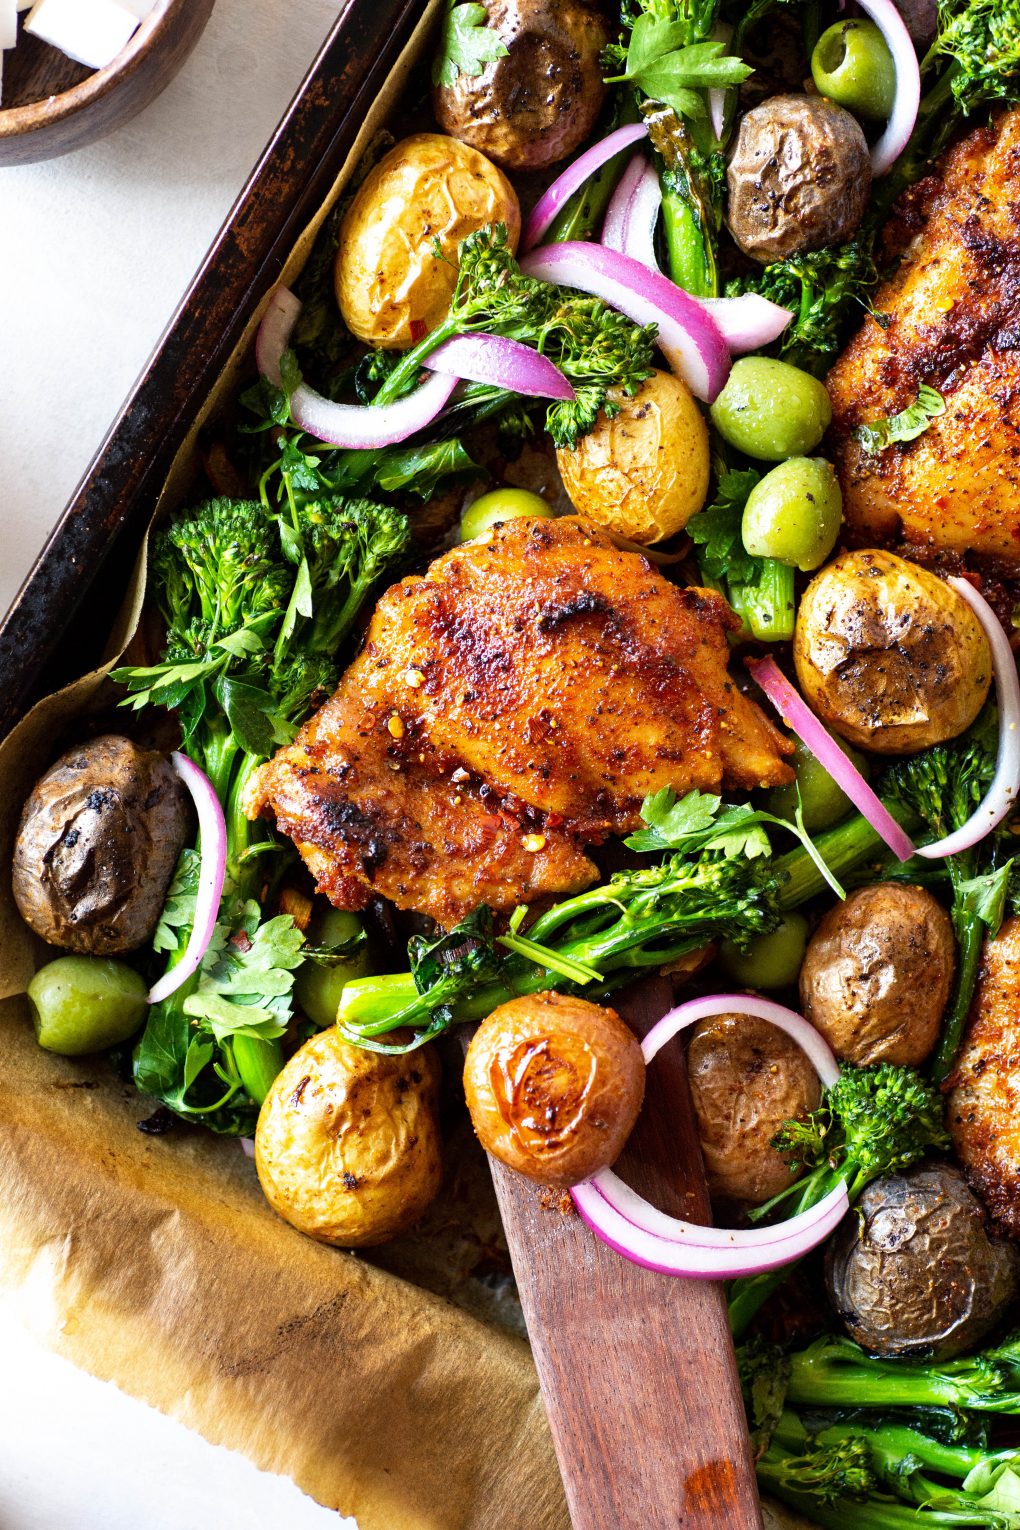 Overhead view of of an angled roasting tray with spiced chicken thighs, potatos, broccolini, olives, and pickled red onions. On a white background next to a small wooden bowl of feta cheese.